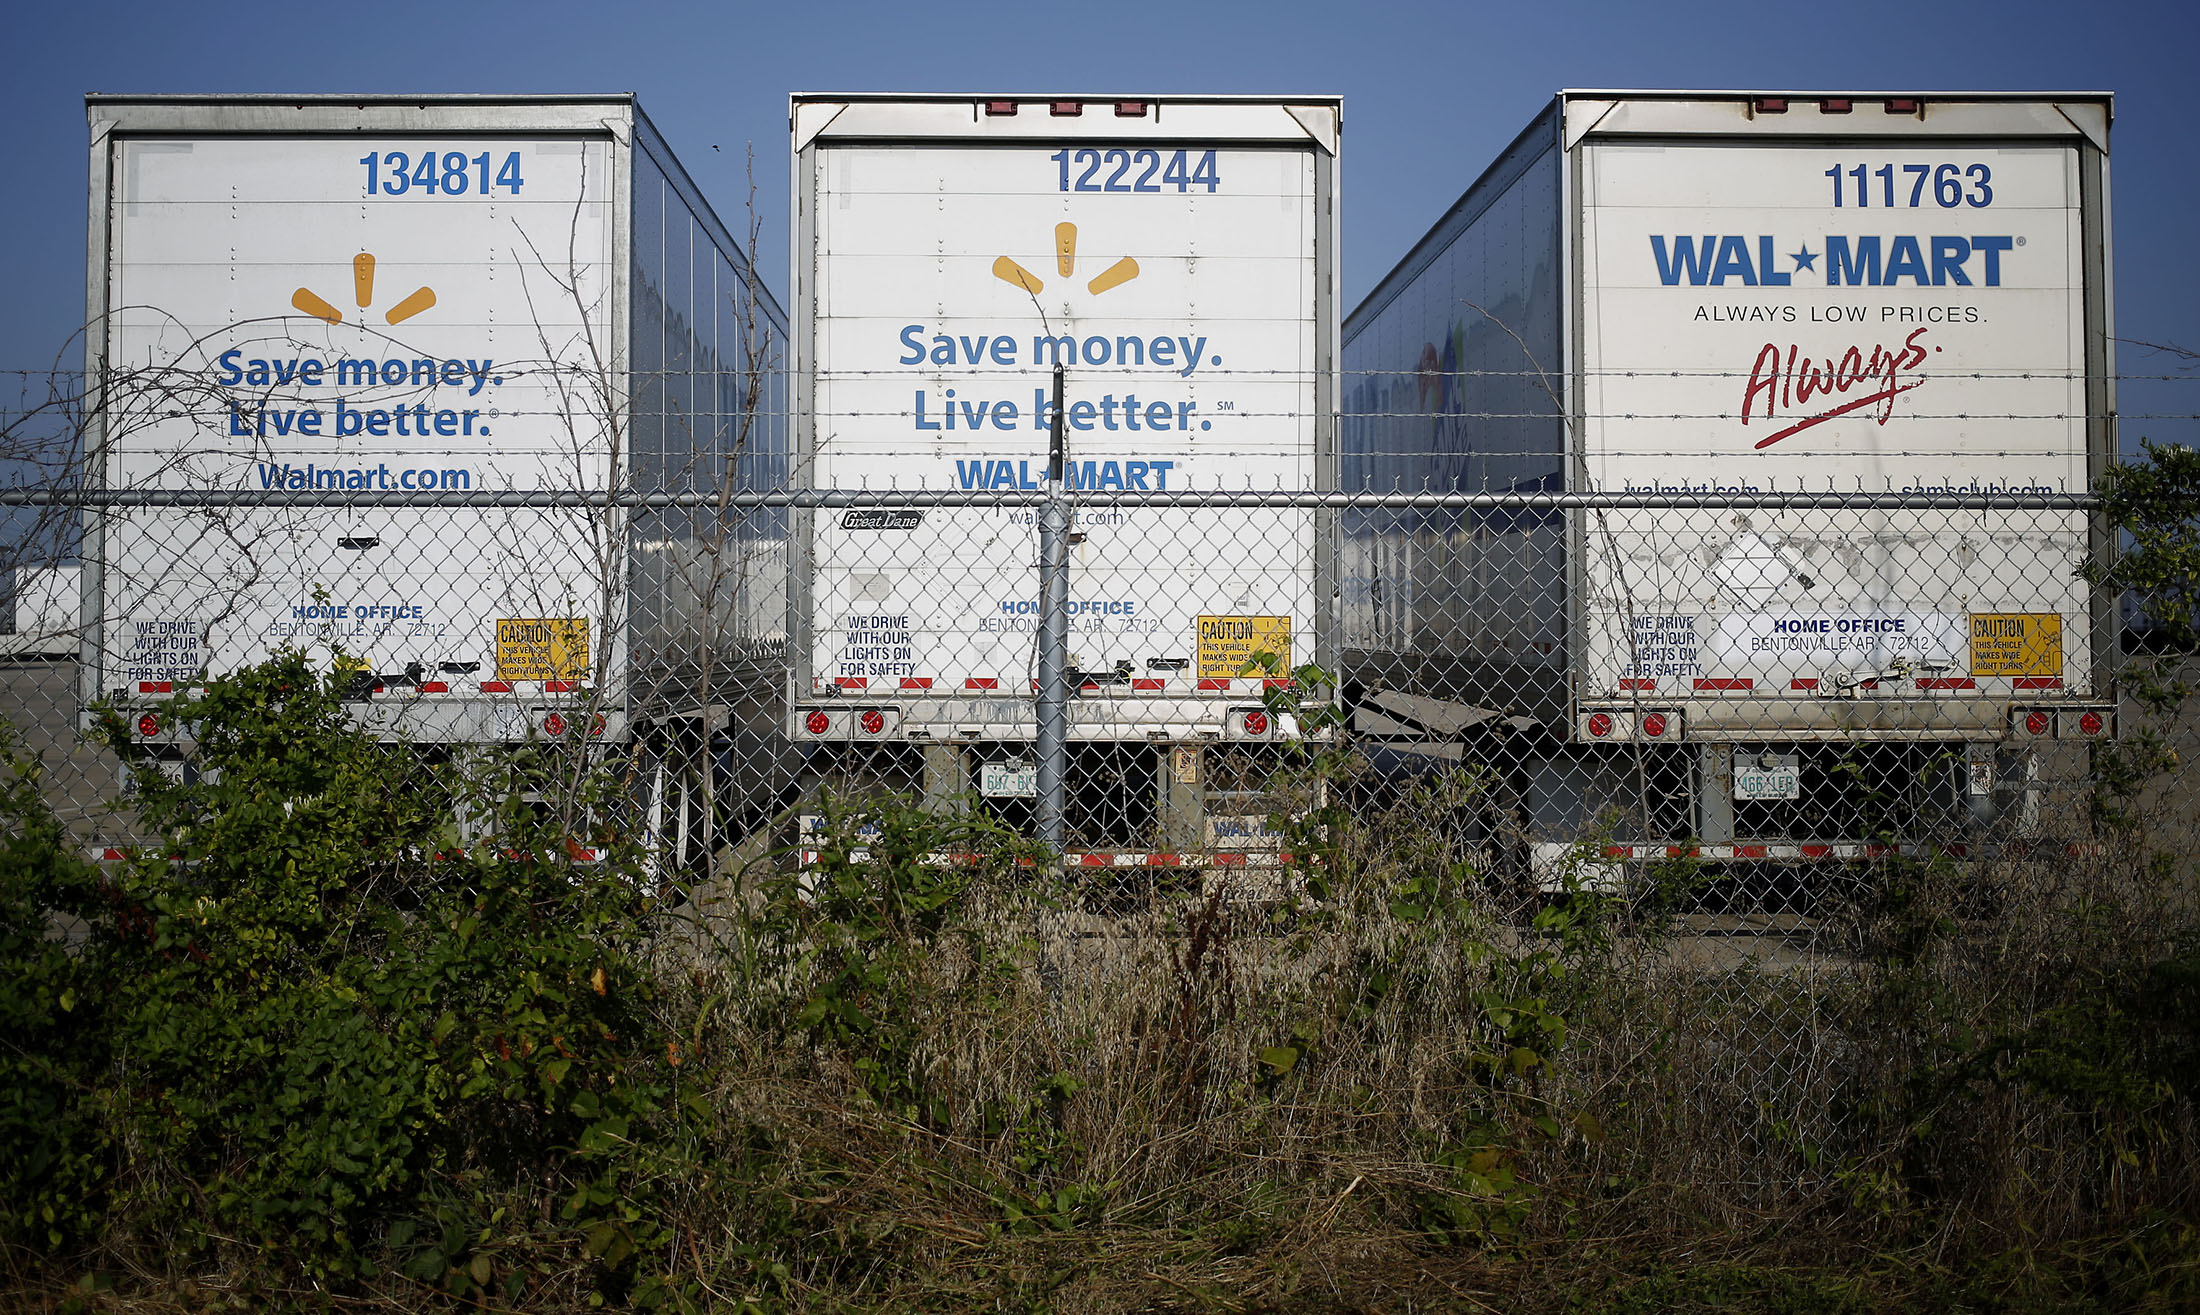 Tractor trailers sit parked outside a Walmart Stores Inc. distribution center in Bentonville, Arkansas.
